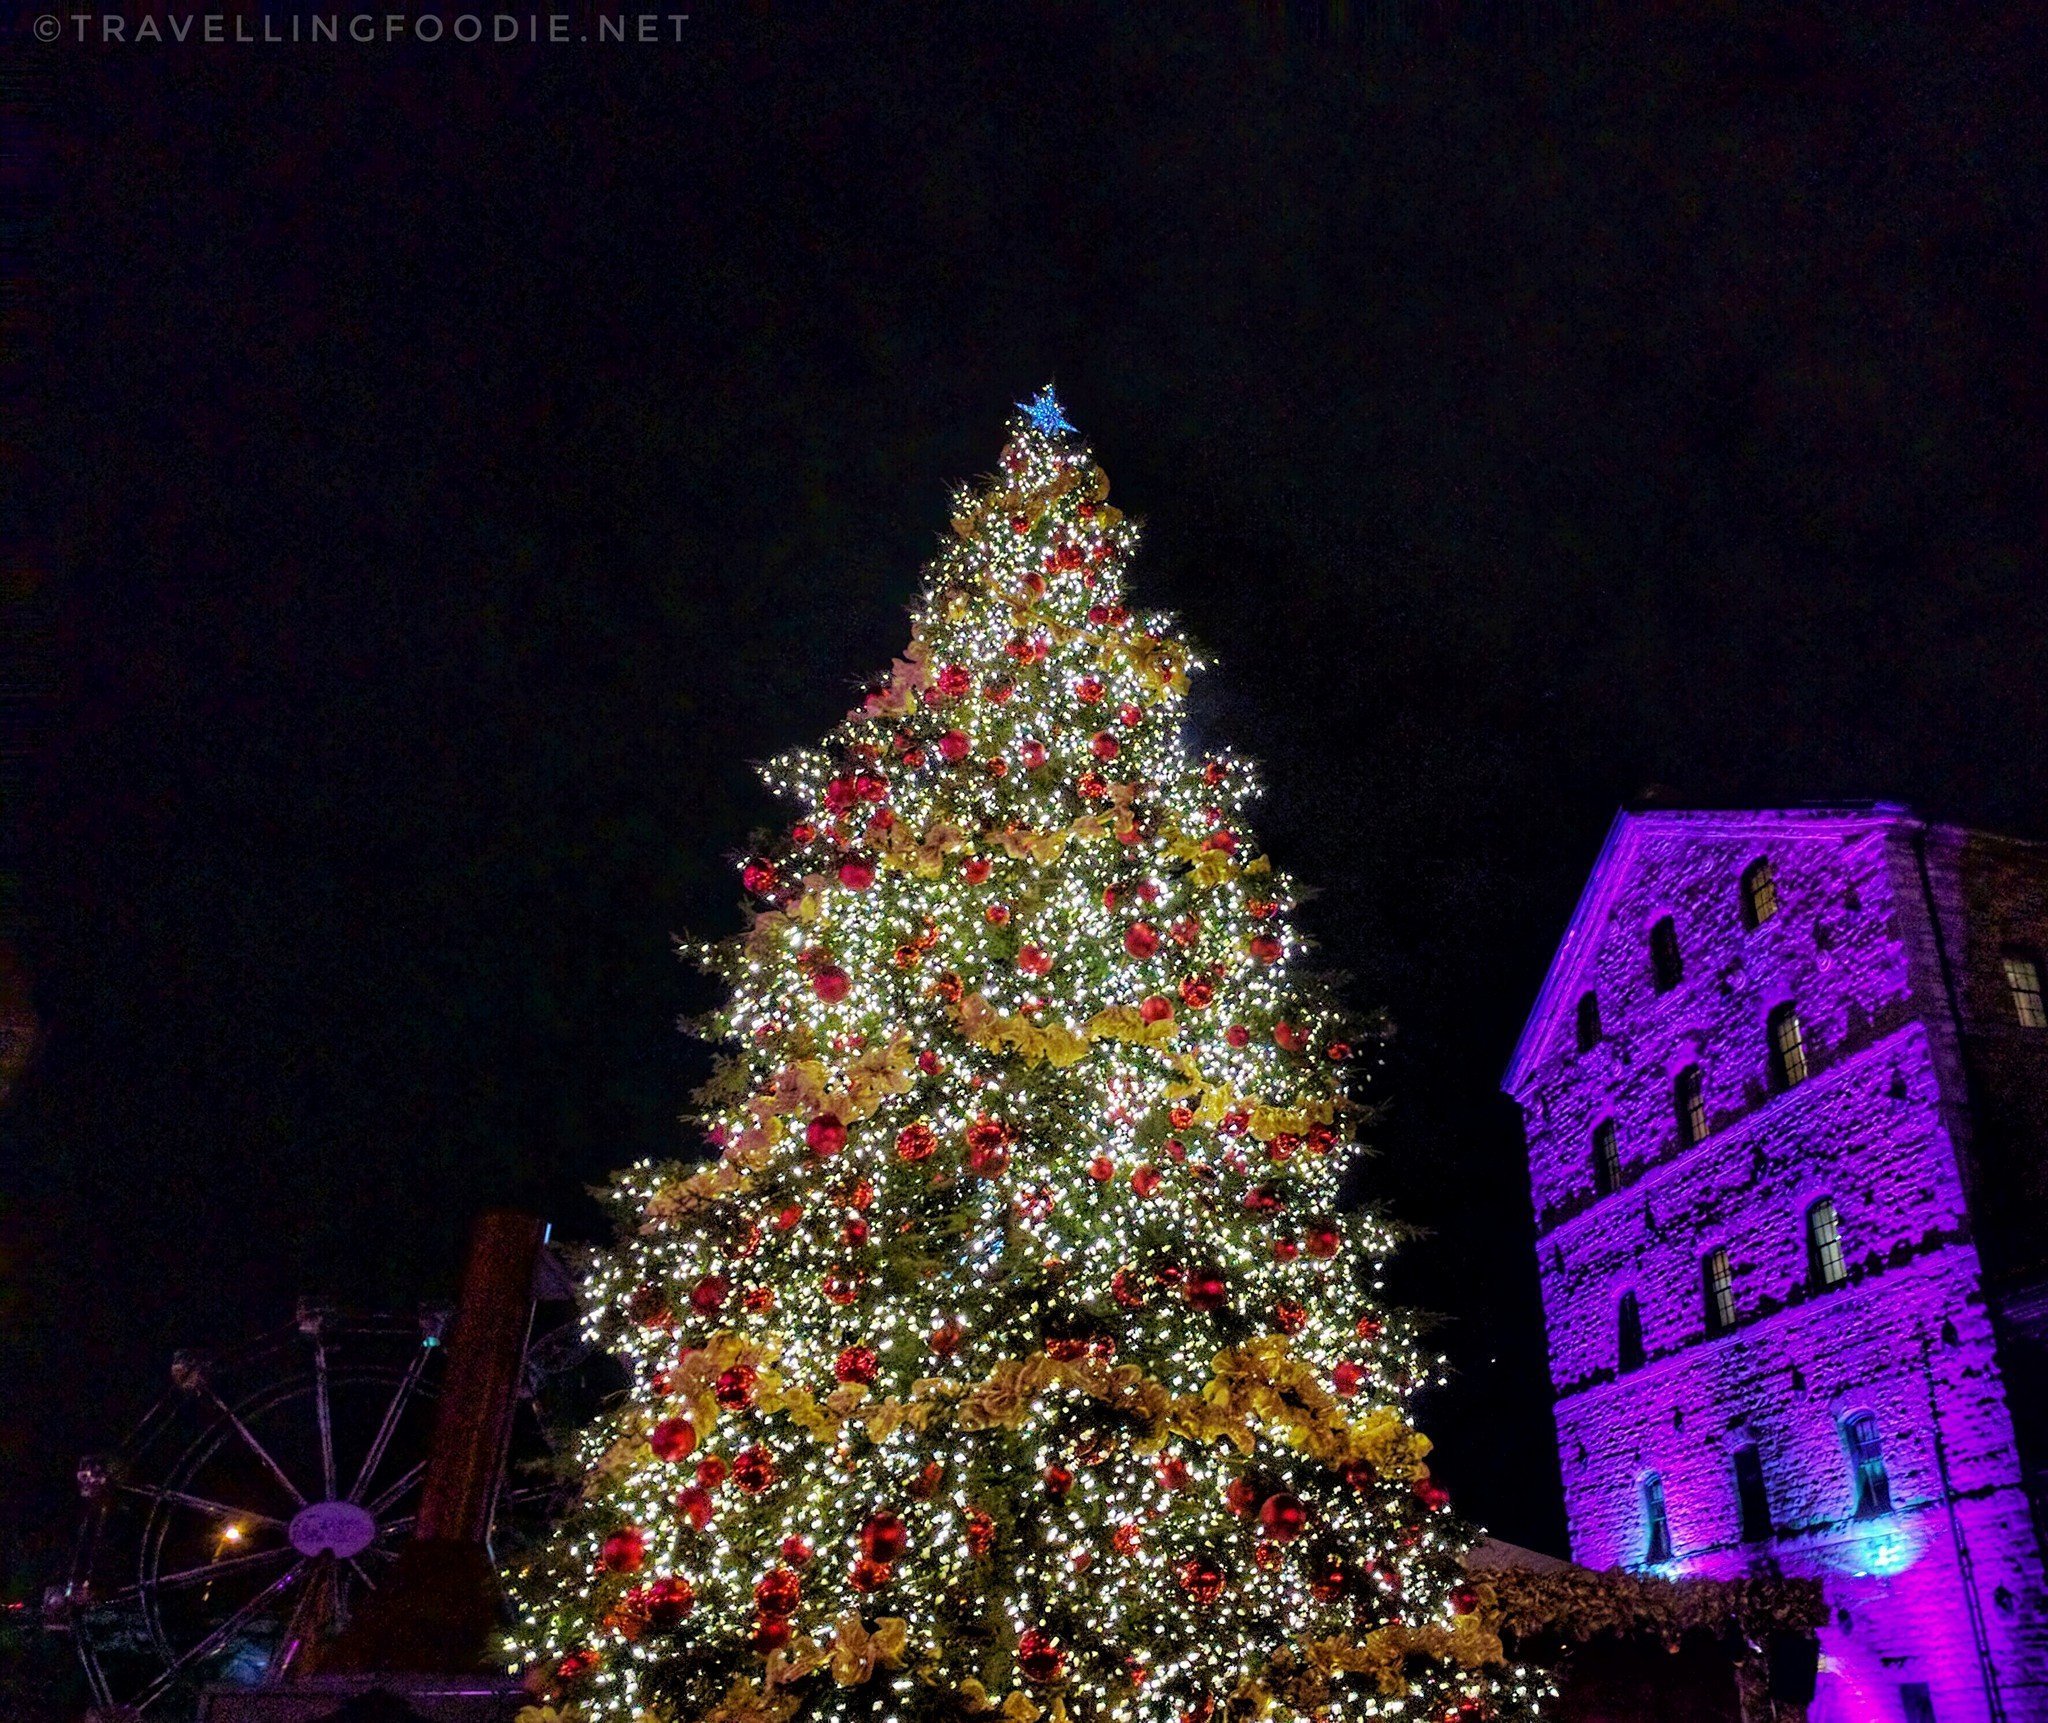 Travelling Foodie visits Toronto Christmas Market at the Distillery District